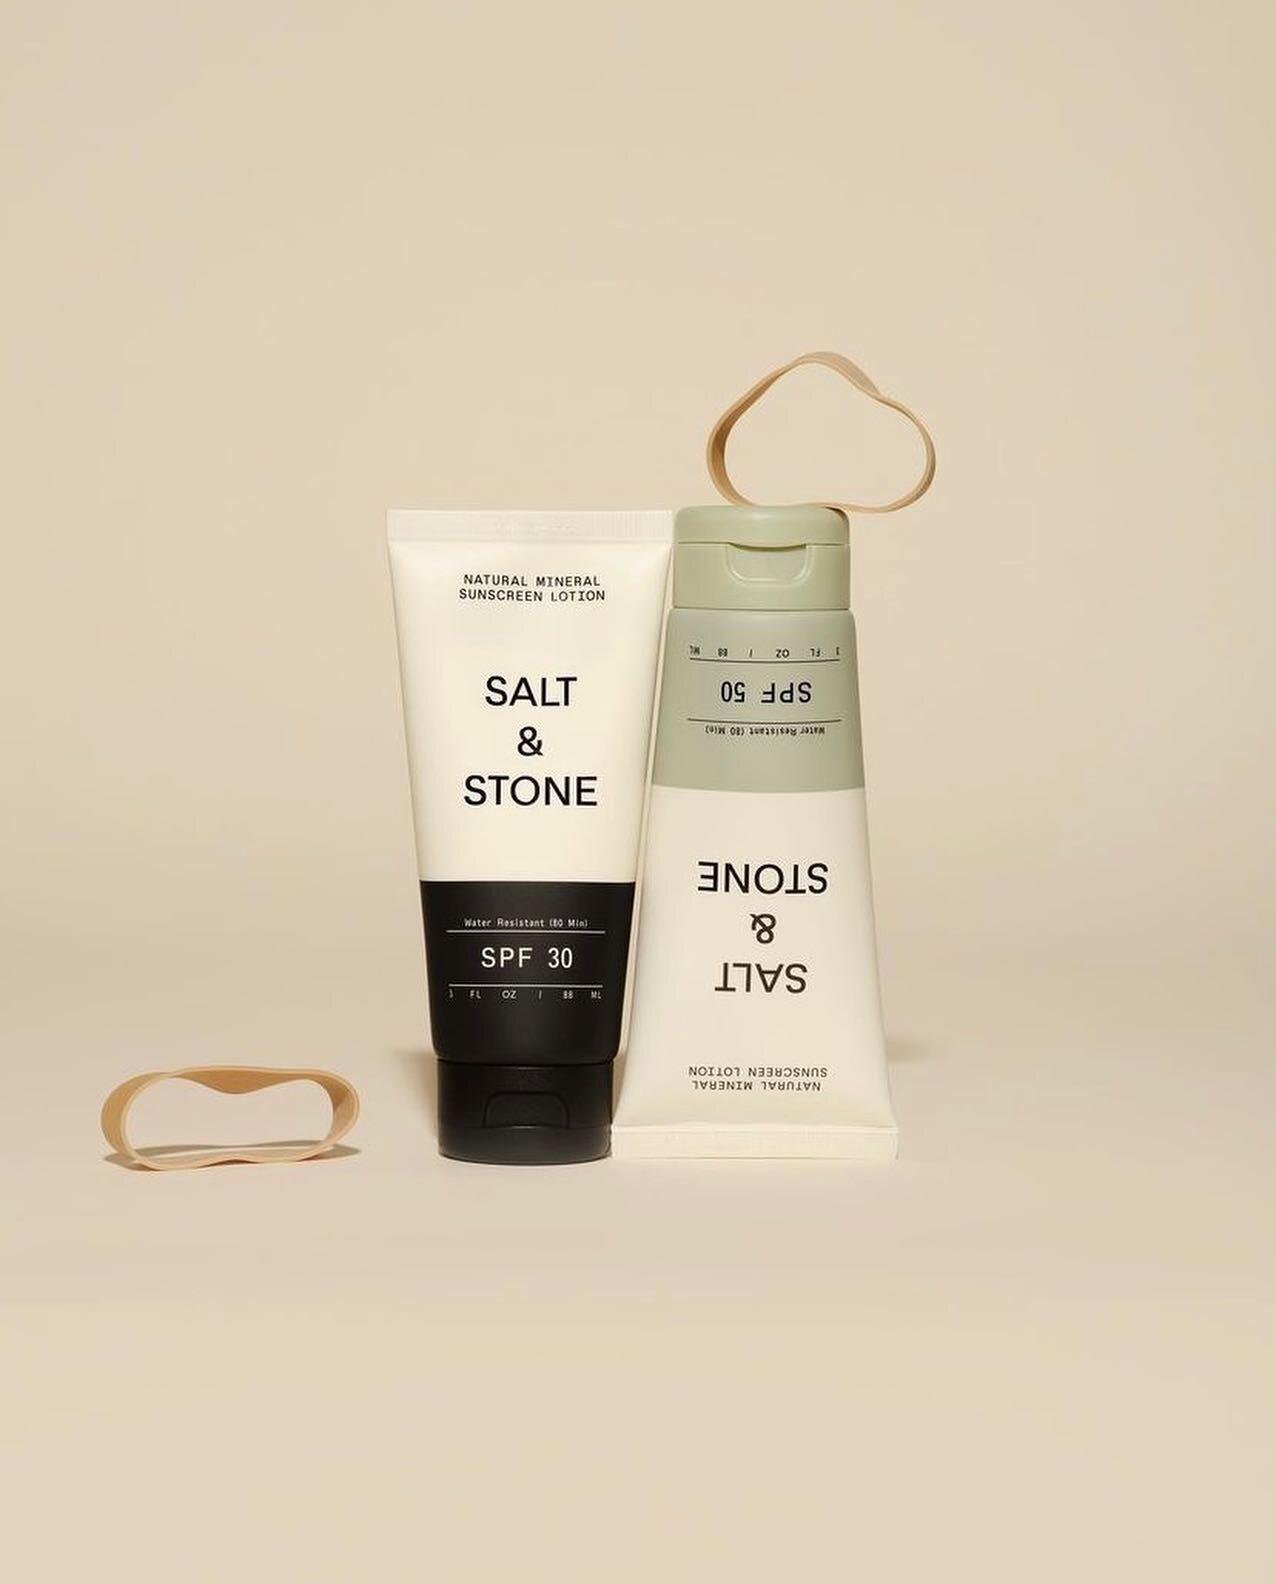 Check out some of our new Salt and Stone products! Natural and reef safe!